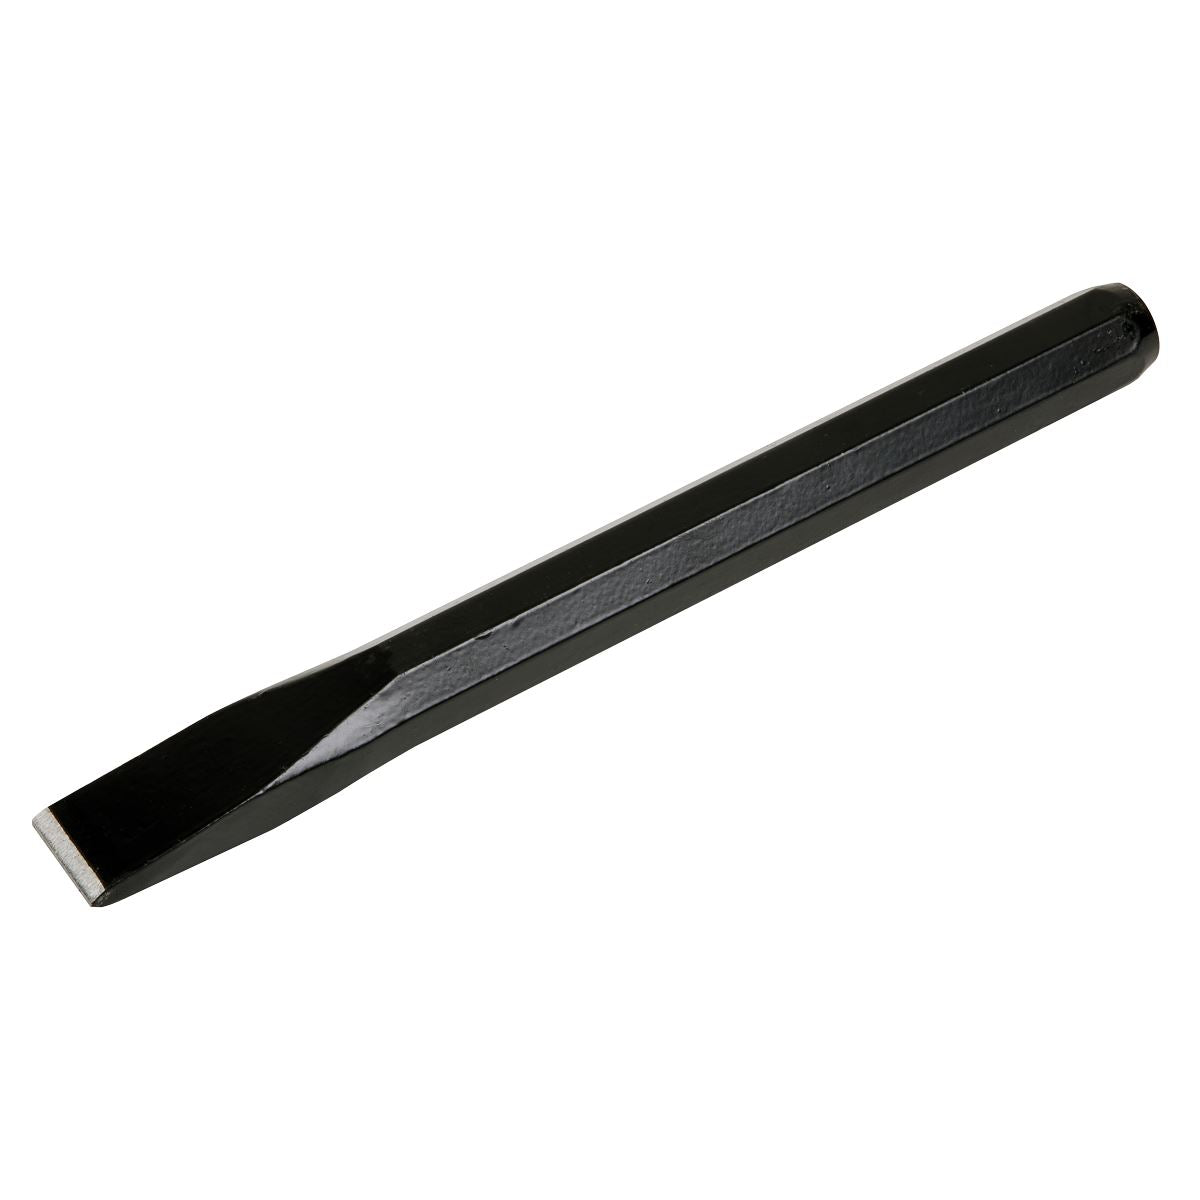 Sealey Cold Chisel 25 x 250mm